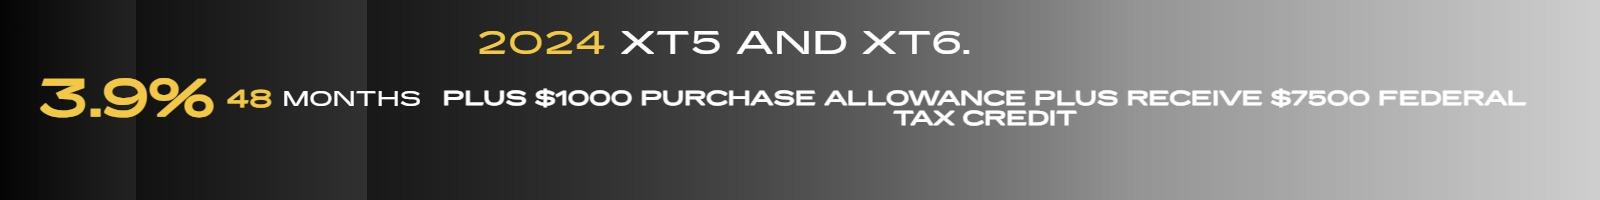 3.9% UP TO 48 MONTHS PLUS 1000 PURCHASE ALLOWANCE ON ALL NEW 24 MY XT5 AND XT6.